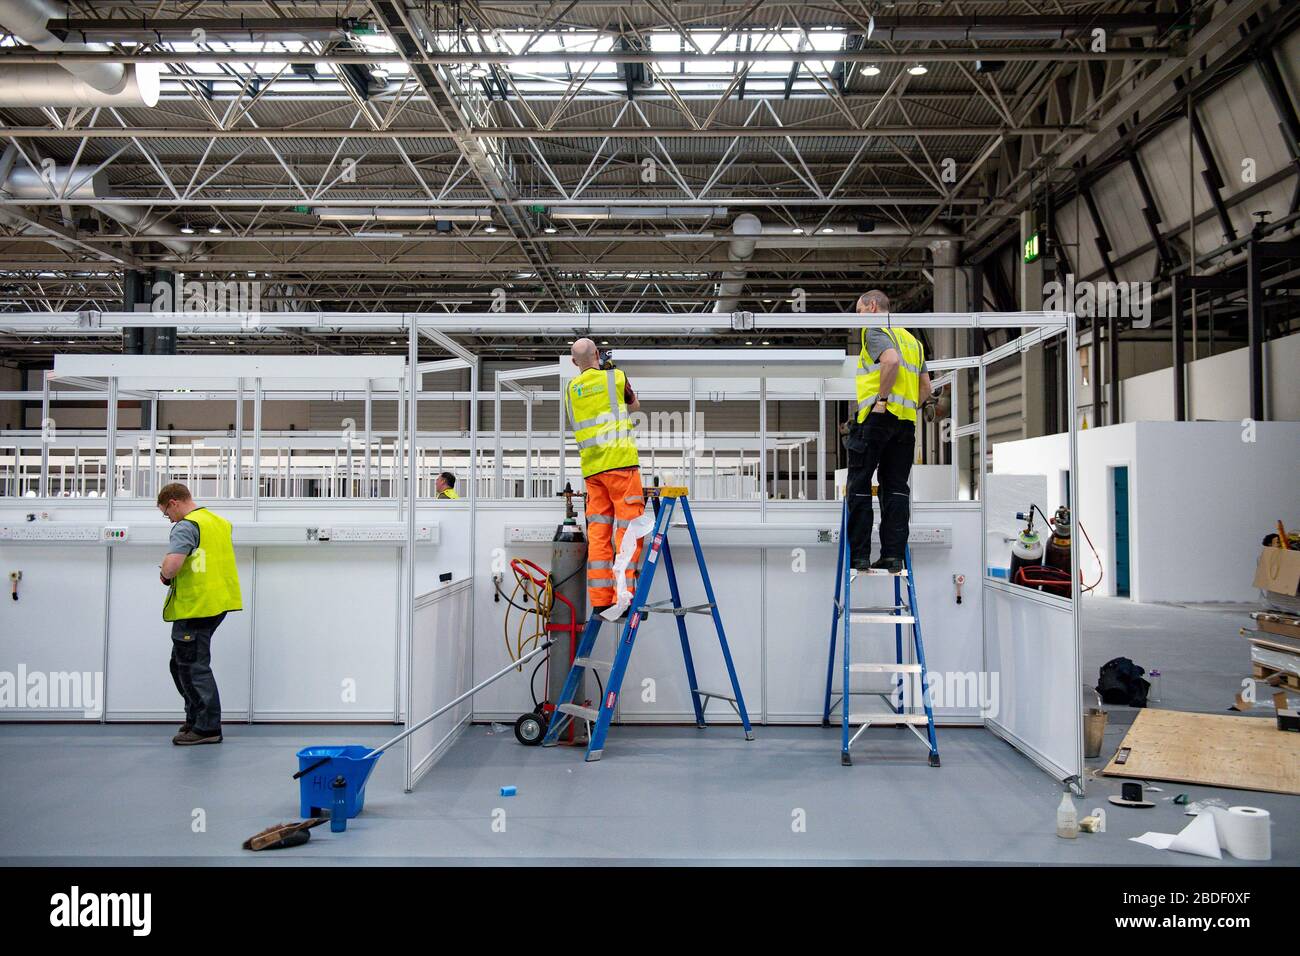 Work continues at the new temporary NHS Nightingale Birmingham Hospital at the NEC in Birmingham, which is being built to provide care for an increased number of patients requiring treatment during the COVID-19 pandemic. Stock Photo